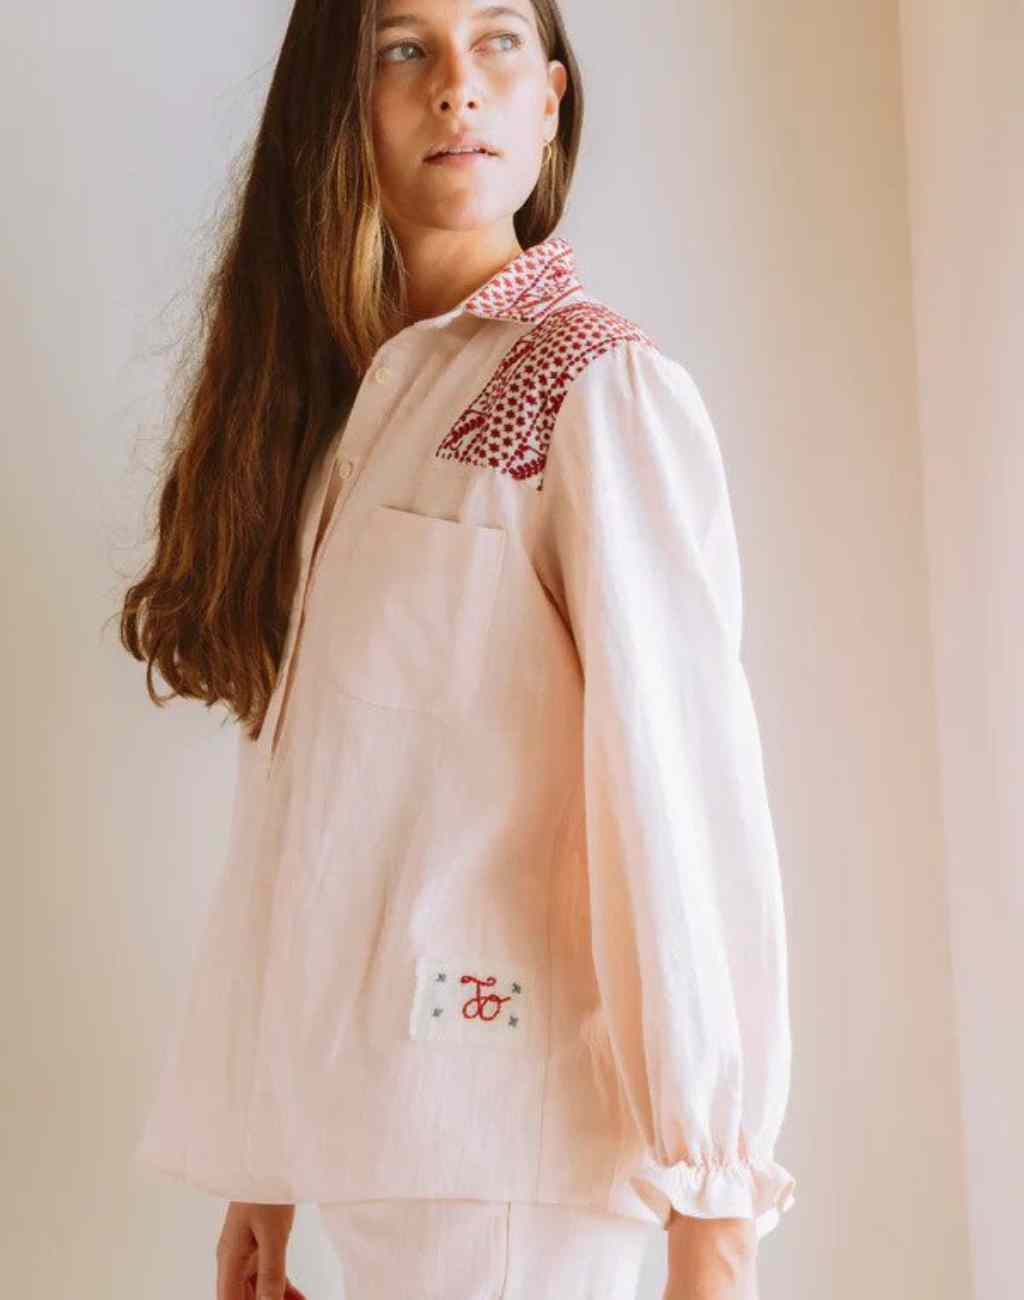 Textured Cotton Shirt with Embroidery Details